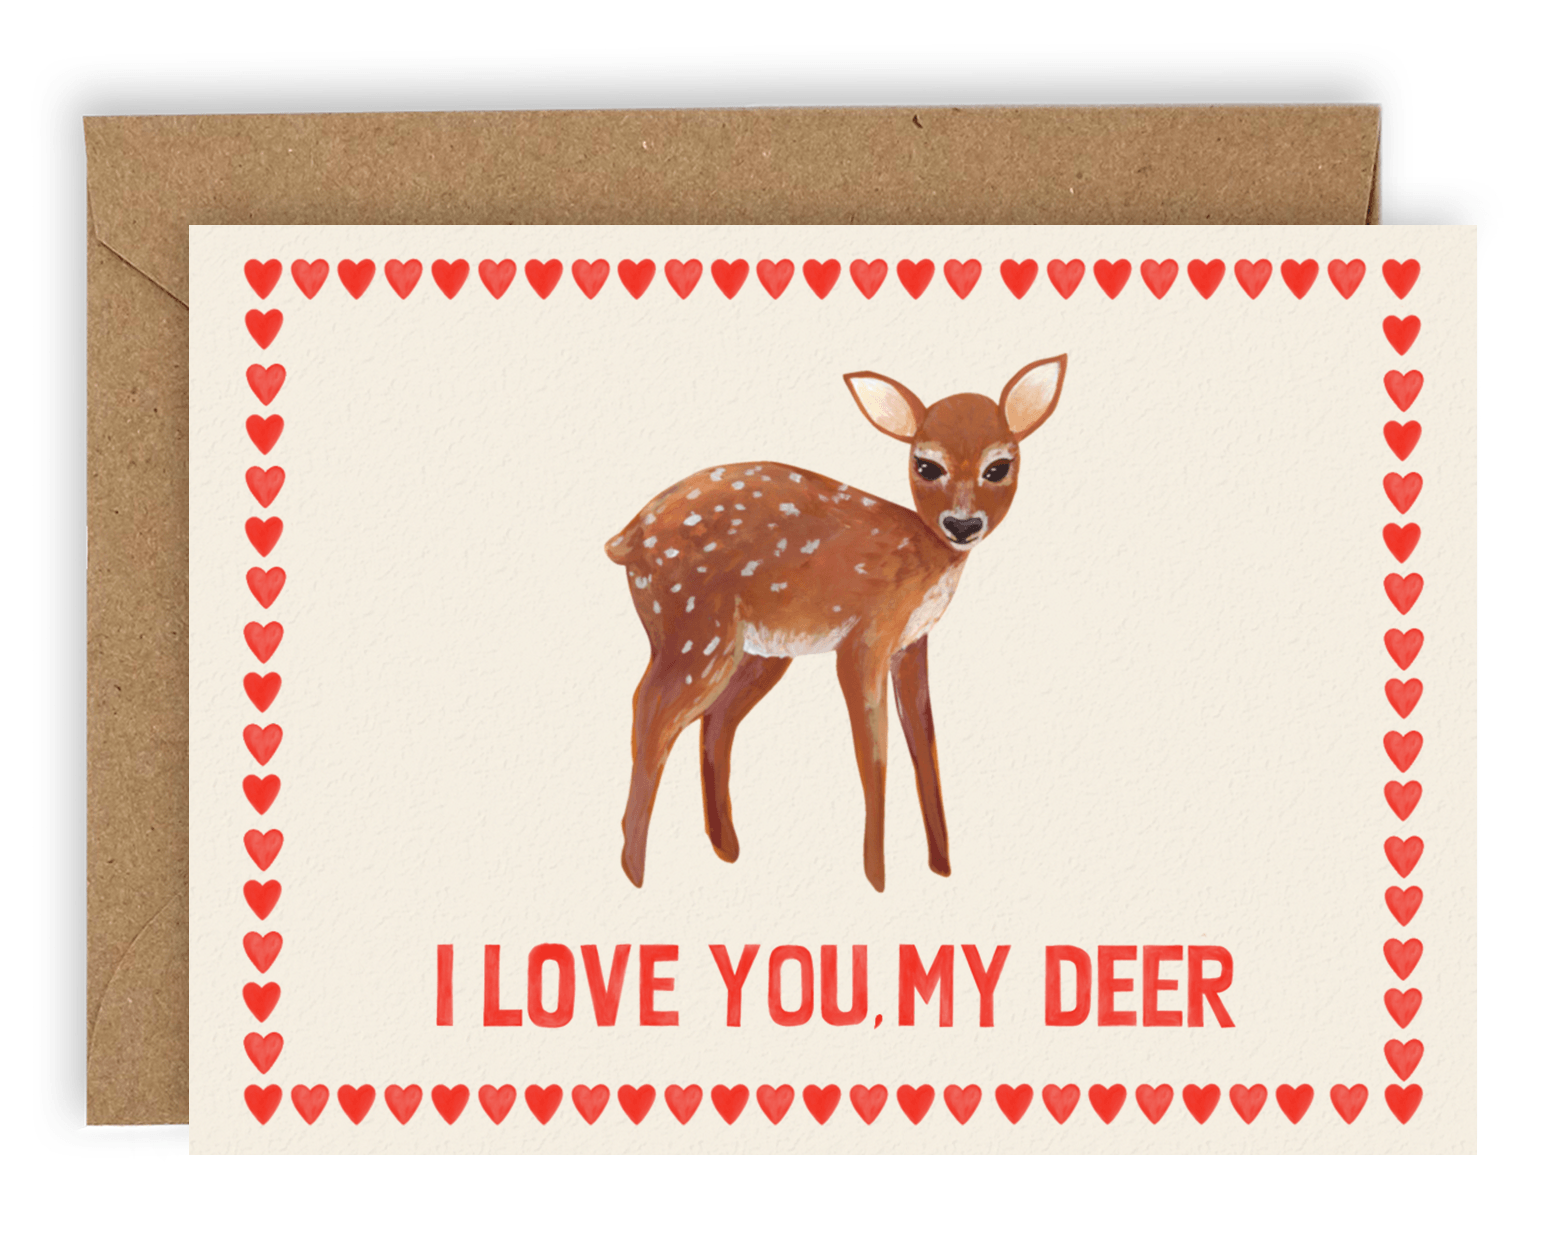 A brown deer positioned above the words "i love you my deer" in red font, surrounded by stacked red hearts along all sides of the card printed on a cream background. Shown with kraft envelope.